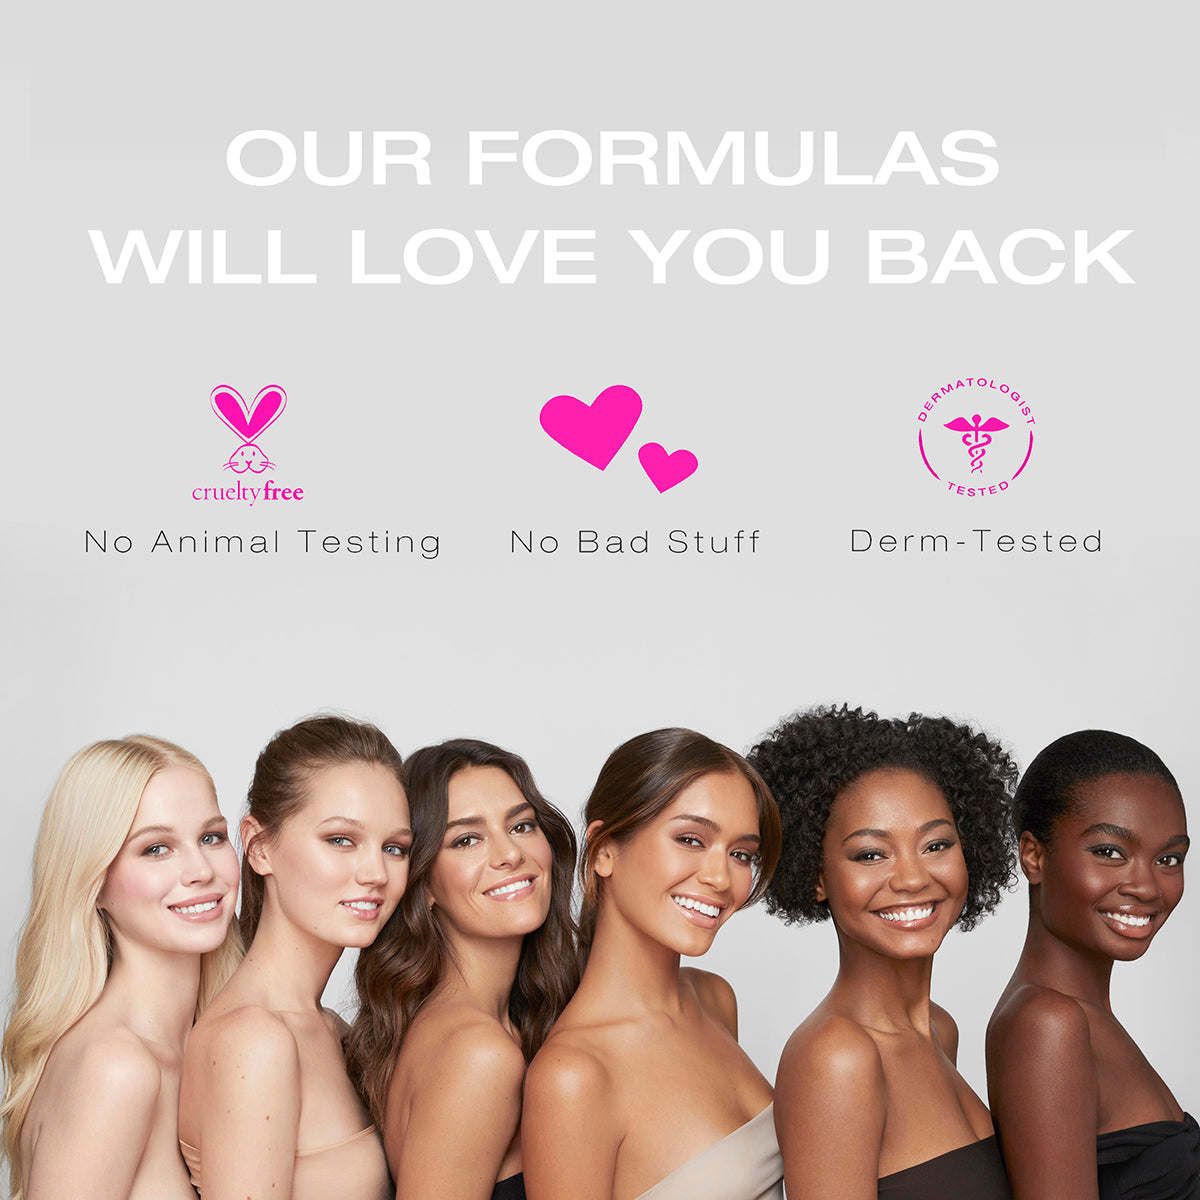 Models wearing the fold out face palette makeup with text describing the product as having no animal testing, no bad stuff, and dermatologist tested